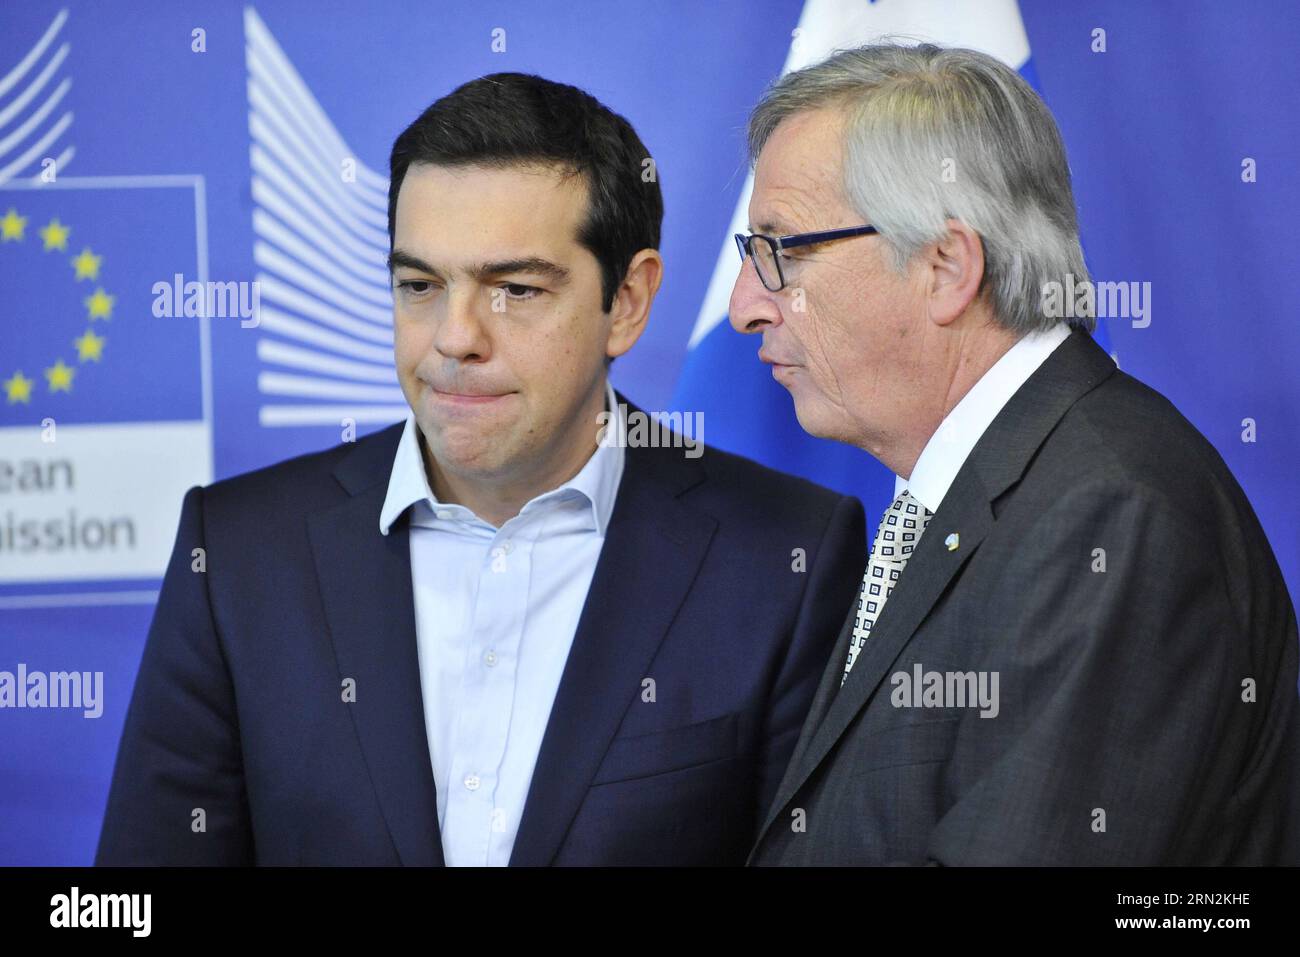 (150313) -- BRUSSELS, March 13, 2015 -- Greece s Prime Minister Alexis Tsipras (L) meets the European Commission President Jean-Claude Juncker at EU headquarters in Brussels, Beglium, March 13, 2015. ) BELGIUM-BRUSSELS-EU-JUNCKER-GREECE-TSIPRAS YexPingfan PUBLICATIONxNOTxINxCHN   Brussels March 13 2015 Greece S Prime Ministers Alexis Tsipras l Meets The European Commission President Jean Claude Juncker AT EU Headquarters in Brussels Beglium March 13 2015 Belgium Brussels EU Juncker Greece Tsipras  PUBLICATIONxNOTxINxCHN Stock Photo